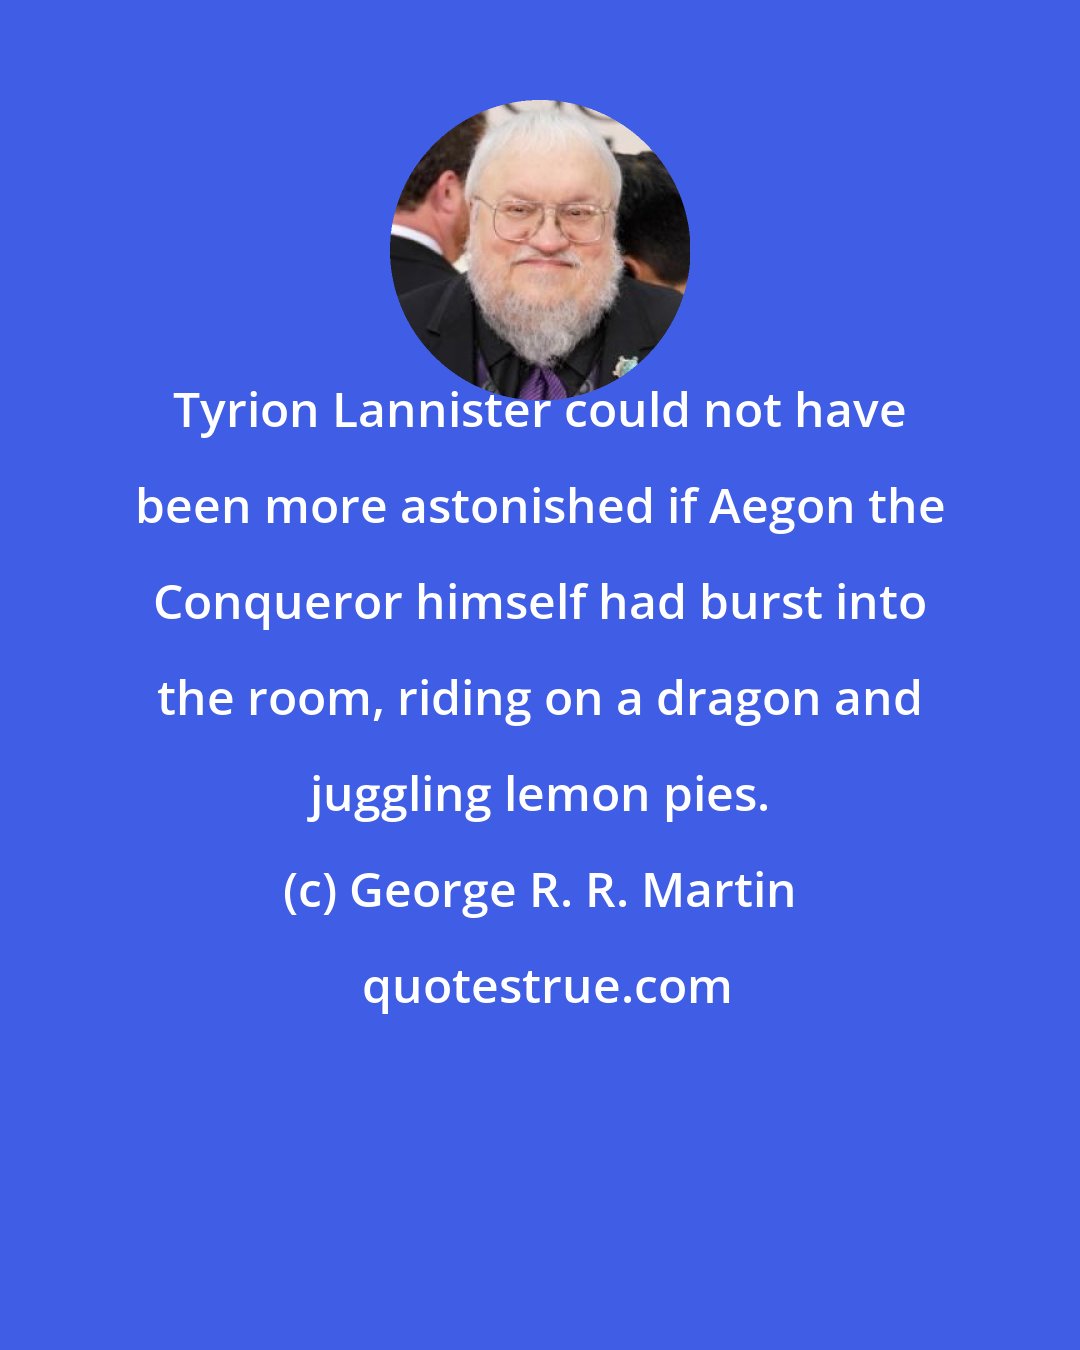 George R. R. Martin: Tyrion Lannister could not have been more astonished if Aegon the Conqueror himself had burst into the room, riding on a dragon and juggling lemon pies.